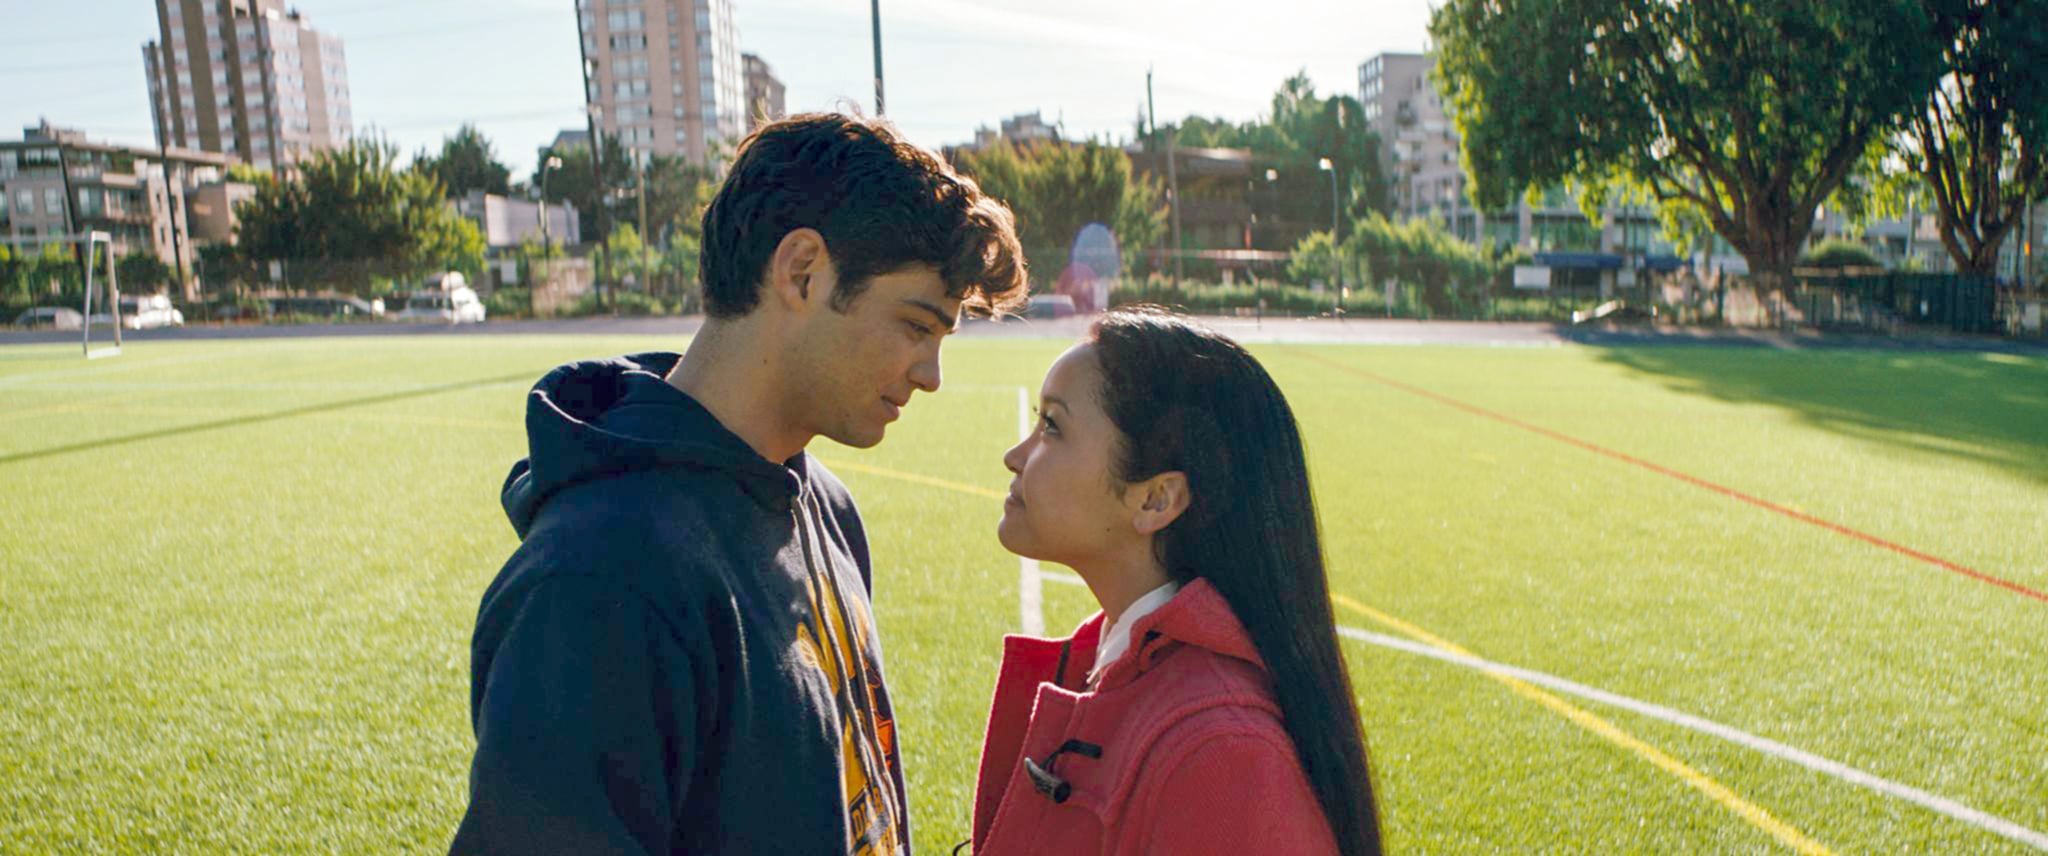 TO ALL THE BOYS I'VE LOVED BEFORE, from left: Noah Centineo, Lana Condor, 2018.  Netflix /Courtesy Everett Collection